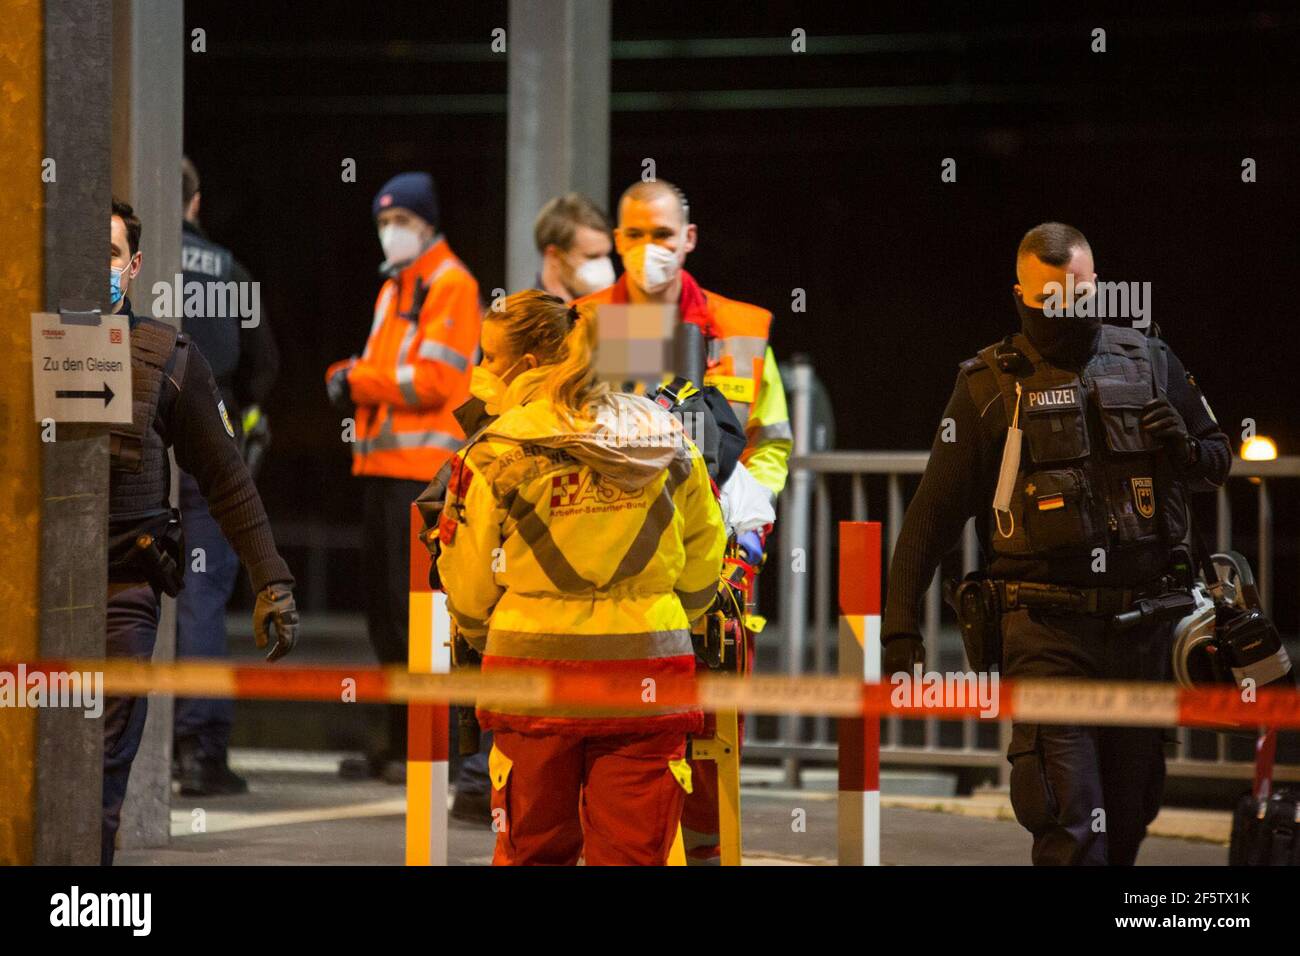 Niedernhausen, Germany. 27th Mar, 2021. Police officers are on duty while rescue workers take away a person. A drunk man fired a shot with his pistol on a regional train in Hesse, triggering a major police operation. Members of the federal and state police as well as special units of the Hessian police were able to arrest the man on the train. Credit: Michael Ehresmann/Wiesbaden112.de/dpa/Alamy Live News Stock Photo